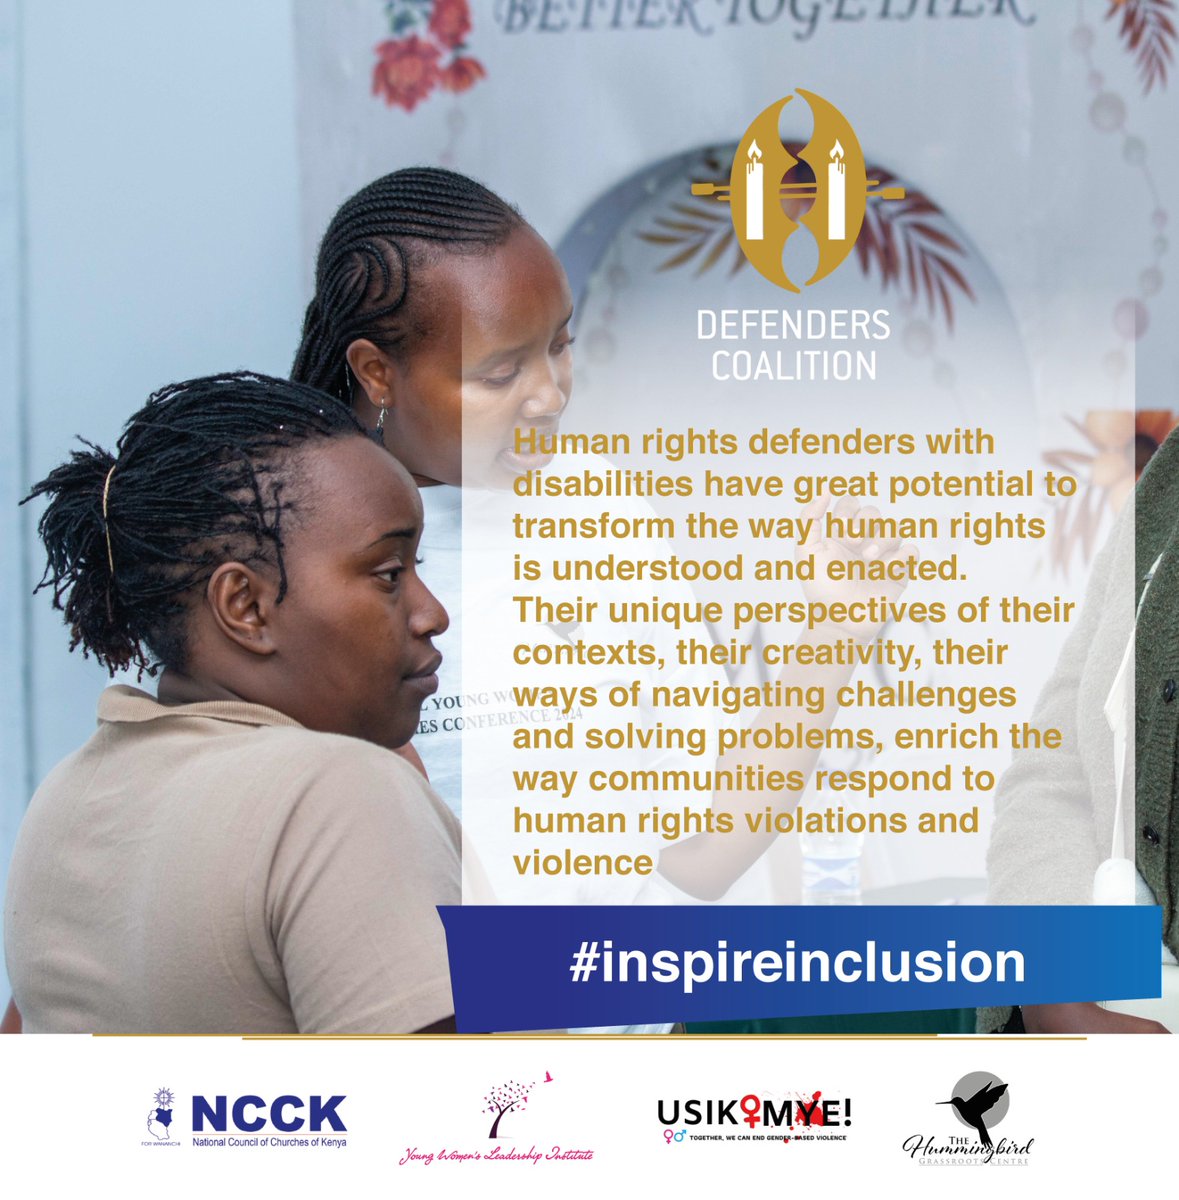 Let's all learn to be problem solvers through navigating challengs and be our own warrios Hello all, Help to amplify our message by using the above material @wanjaah @THGCenterKe
@thgcenterke
@defenderske
@ncckkenya
@ywli_info
@usikimye
#inspireinclusion